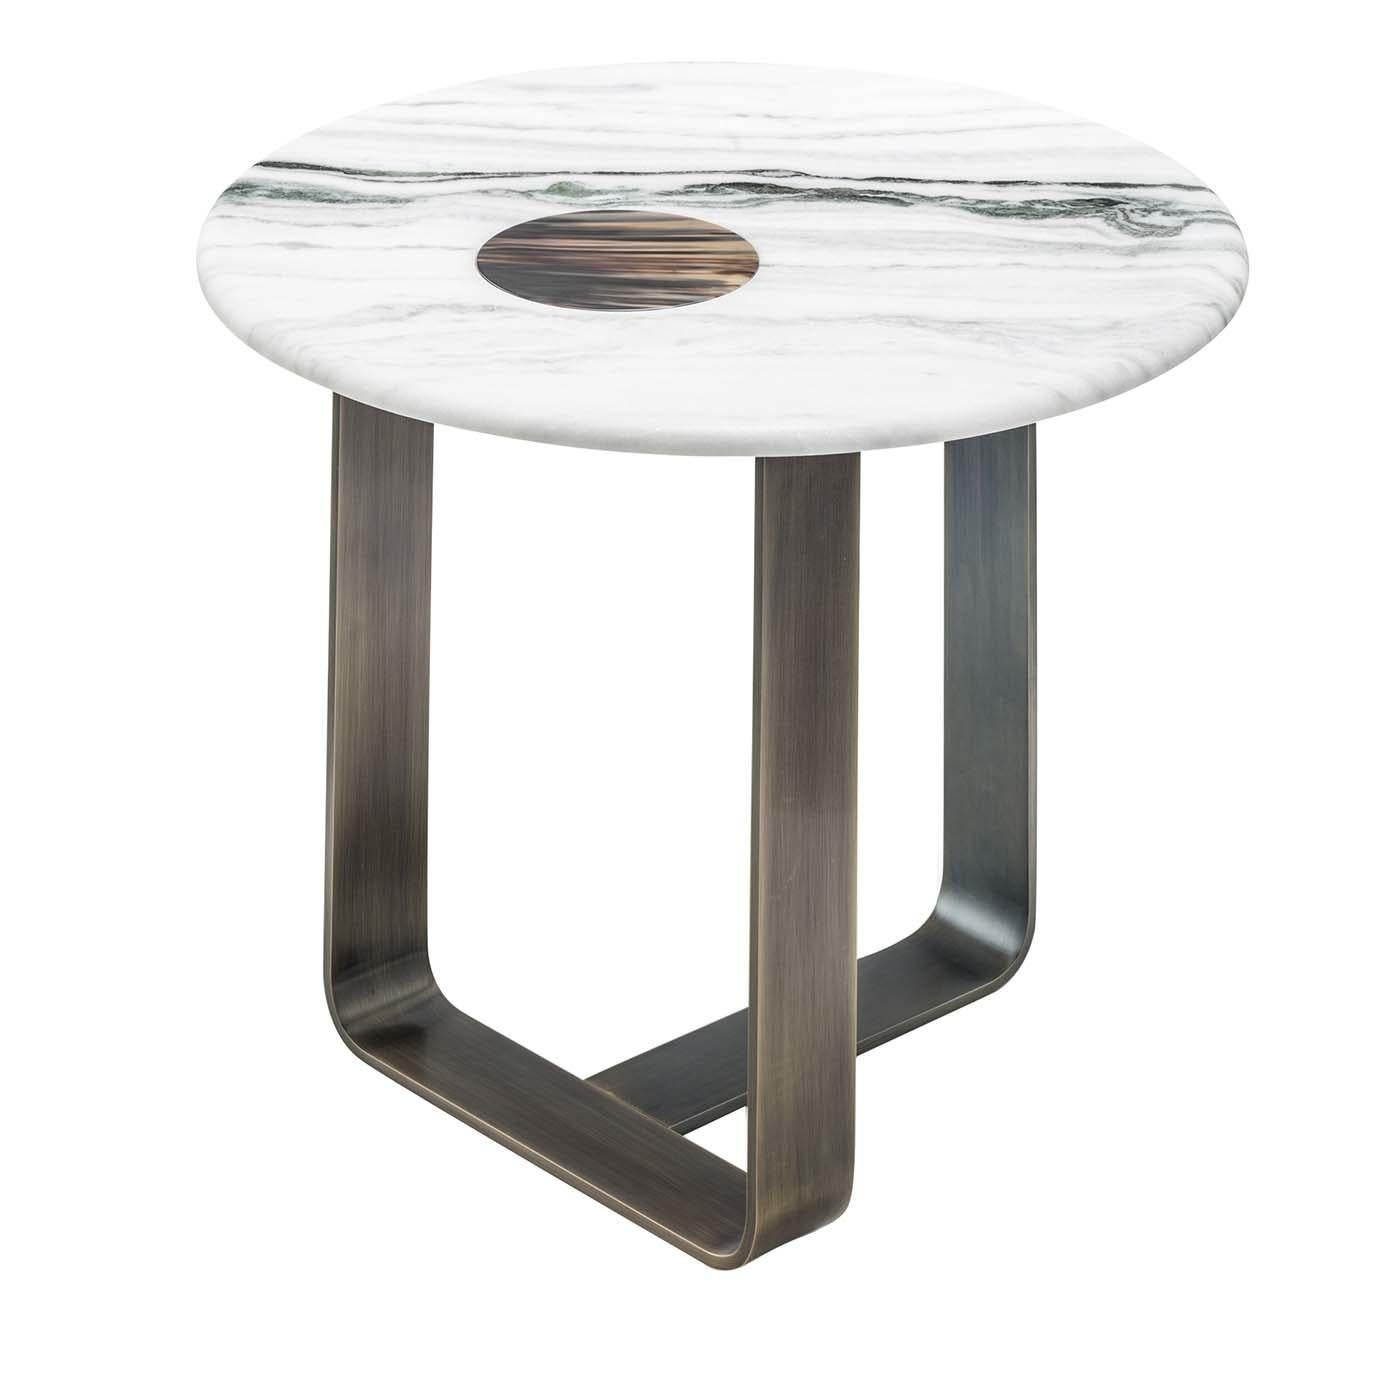 Named after the Greek god that carried the sun each morning to illuminate the earth, this stunning side table boasts a round top of Stelvio marble with a satin finish adorned with a round inlay in Horn. The natural decorative patterns of these two